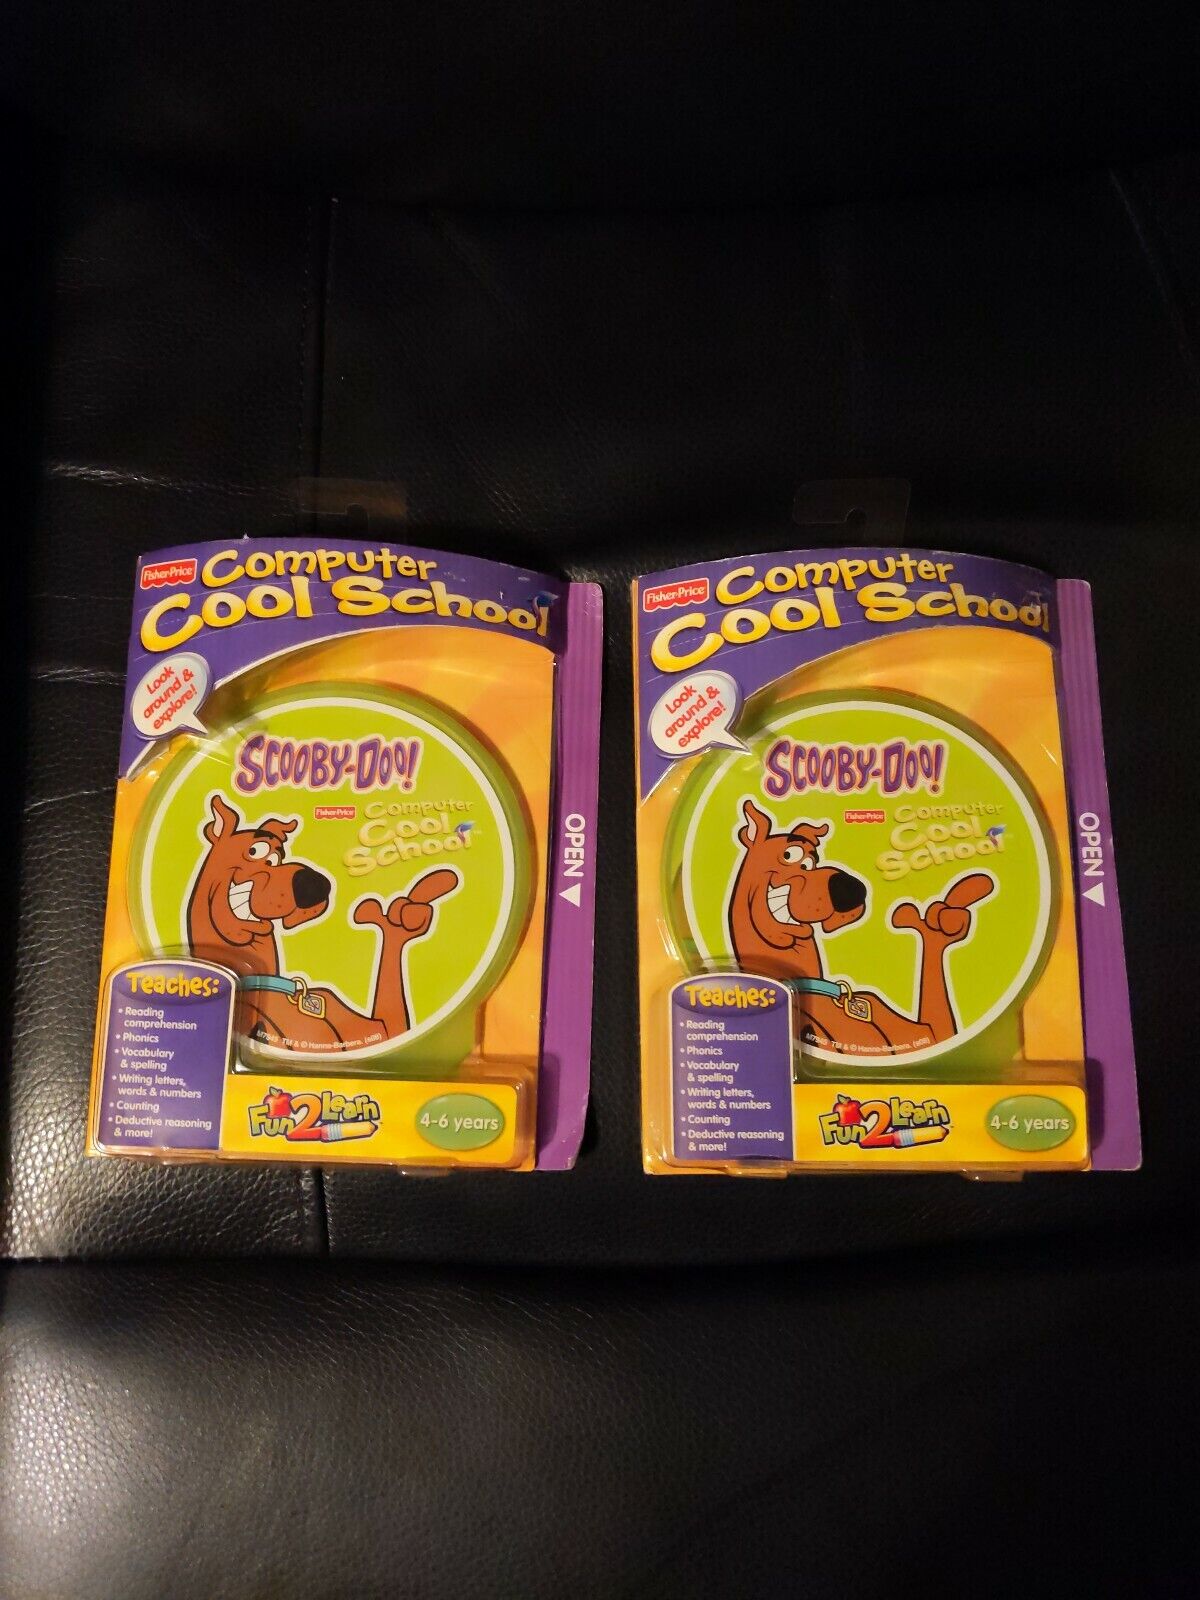 Lot of 2 Fisher Price Computer Cool School Scooby Doo CD Learning Software